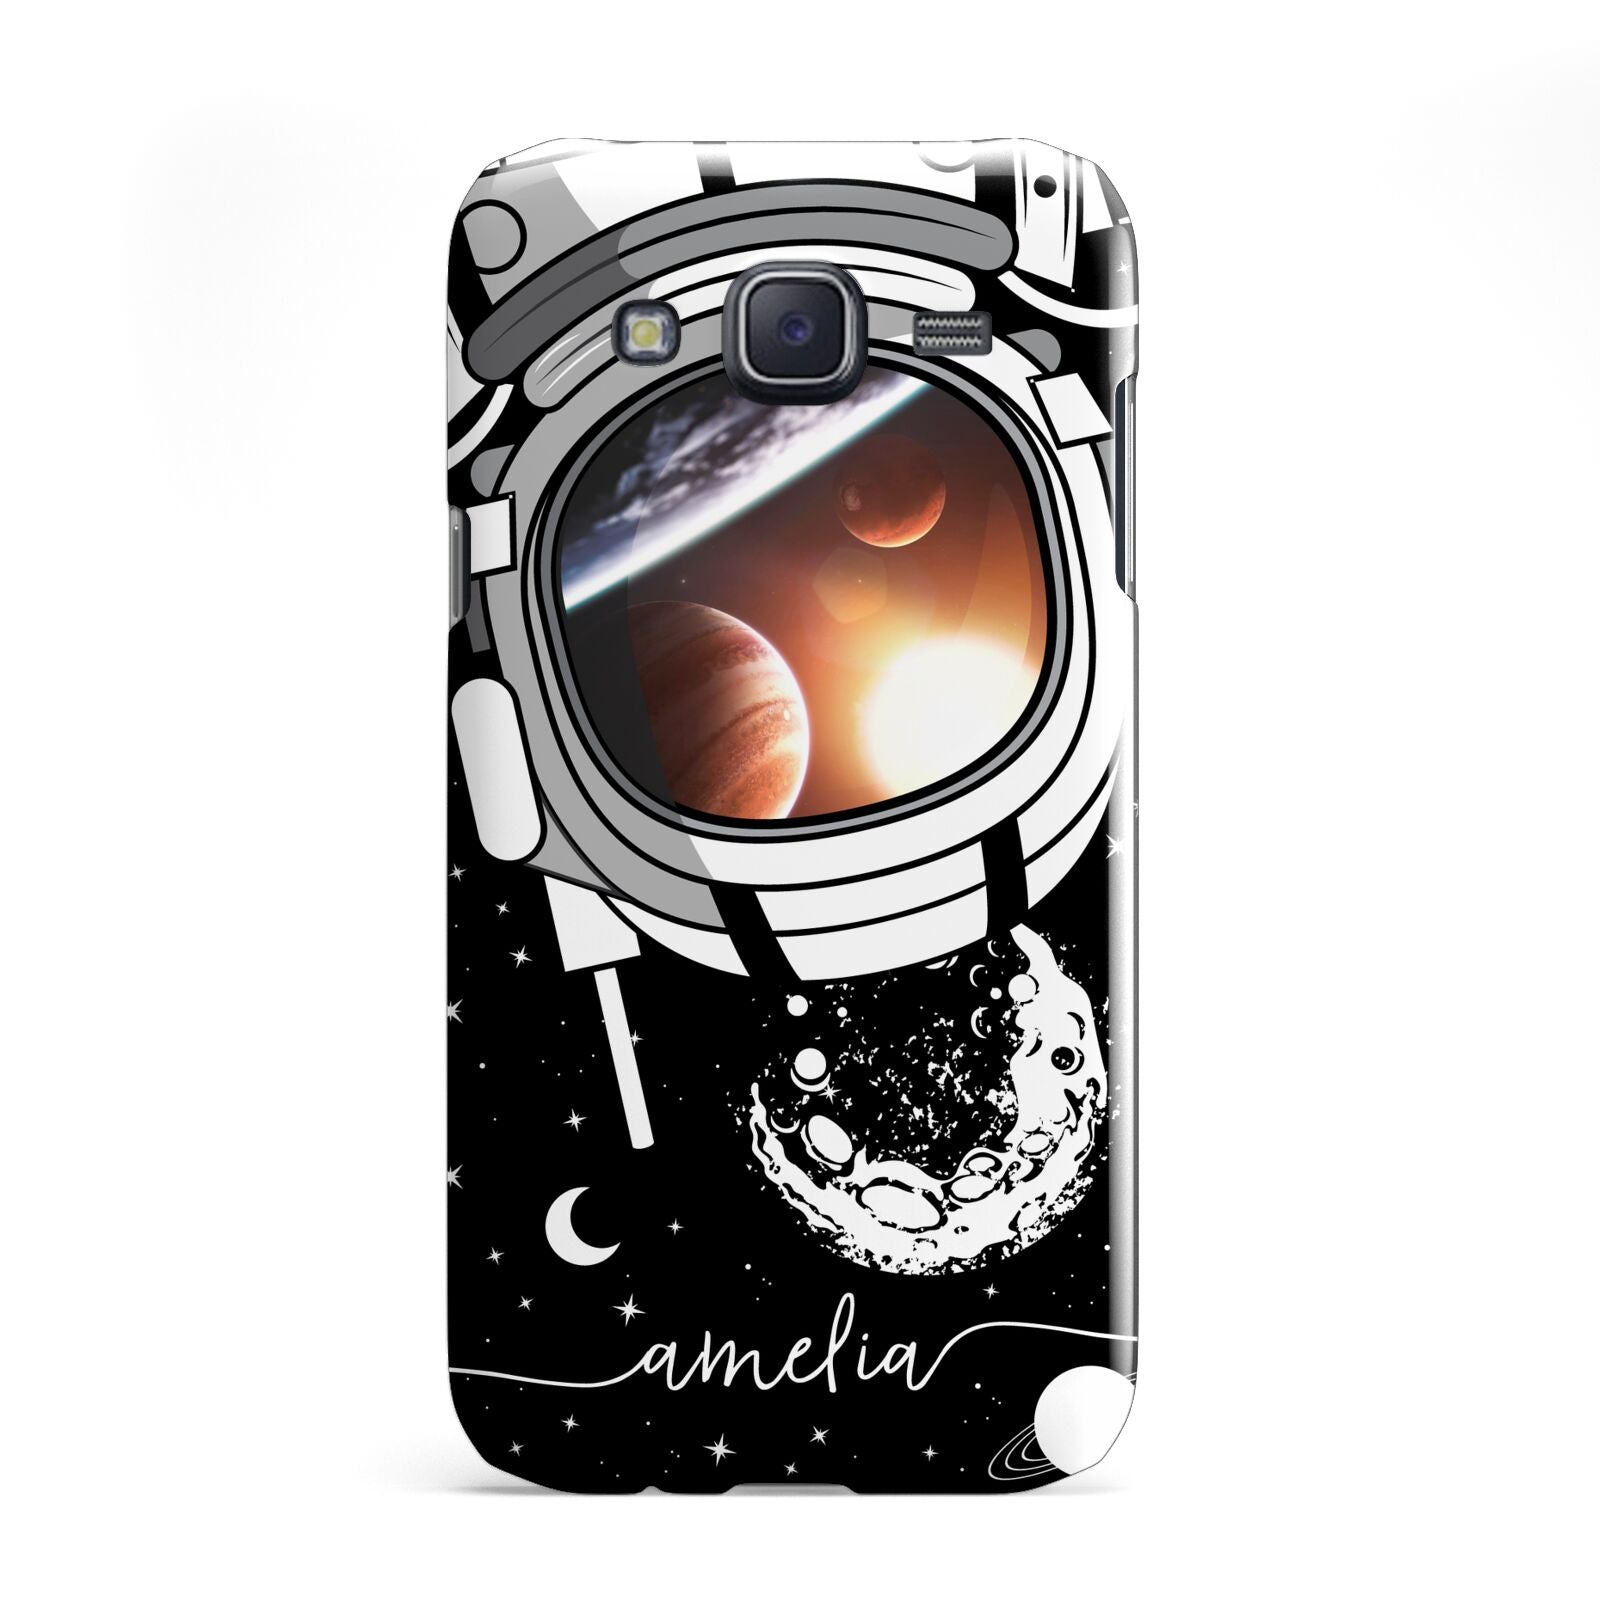 Personalised Astronaut in Space Name Samsung Galaxy J5 Case